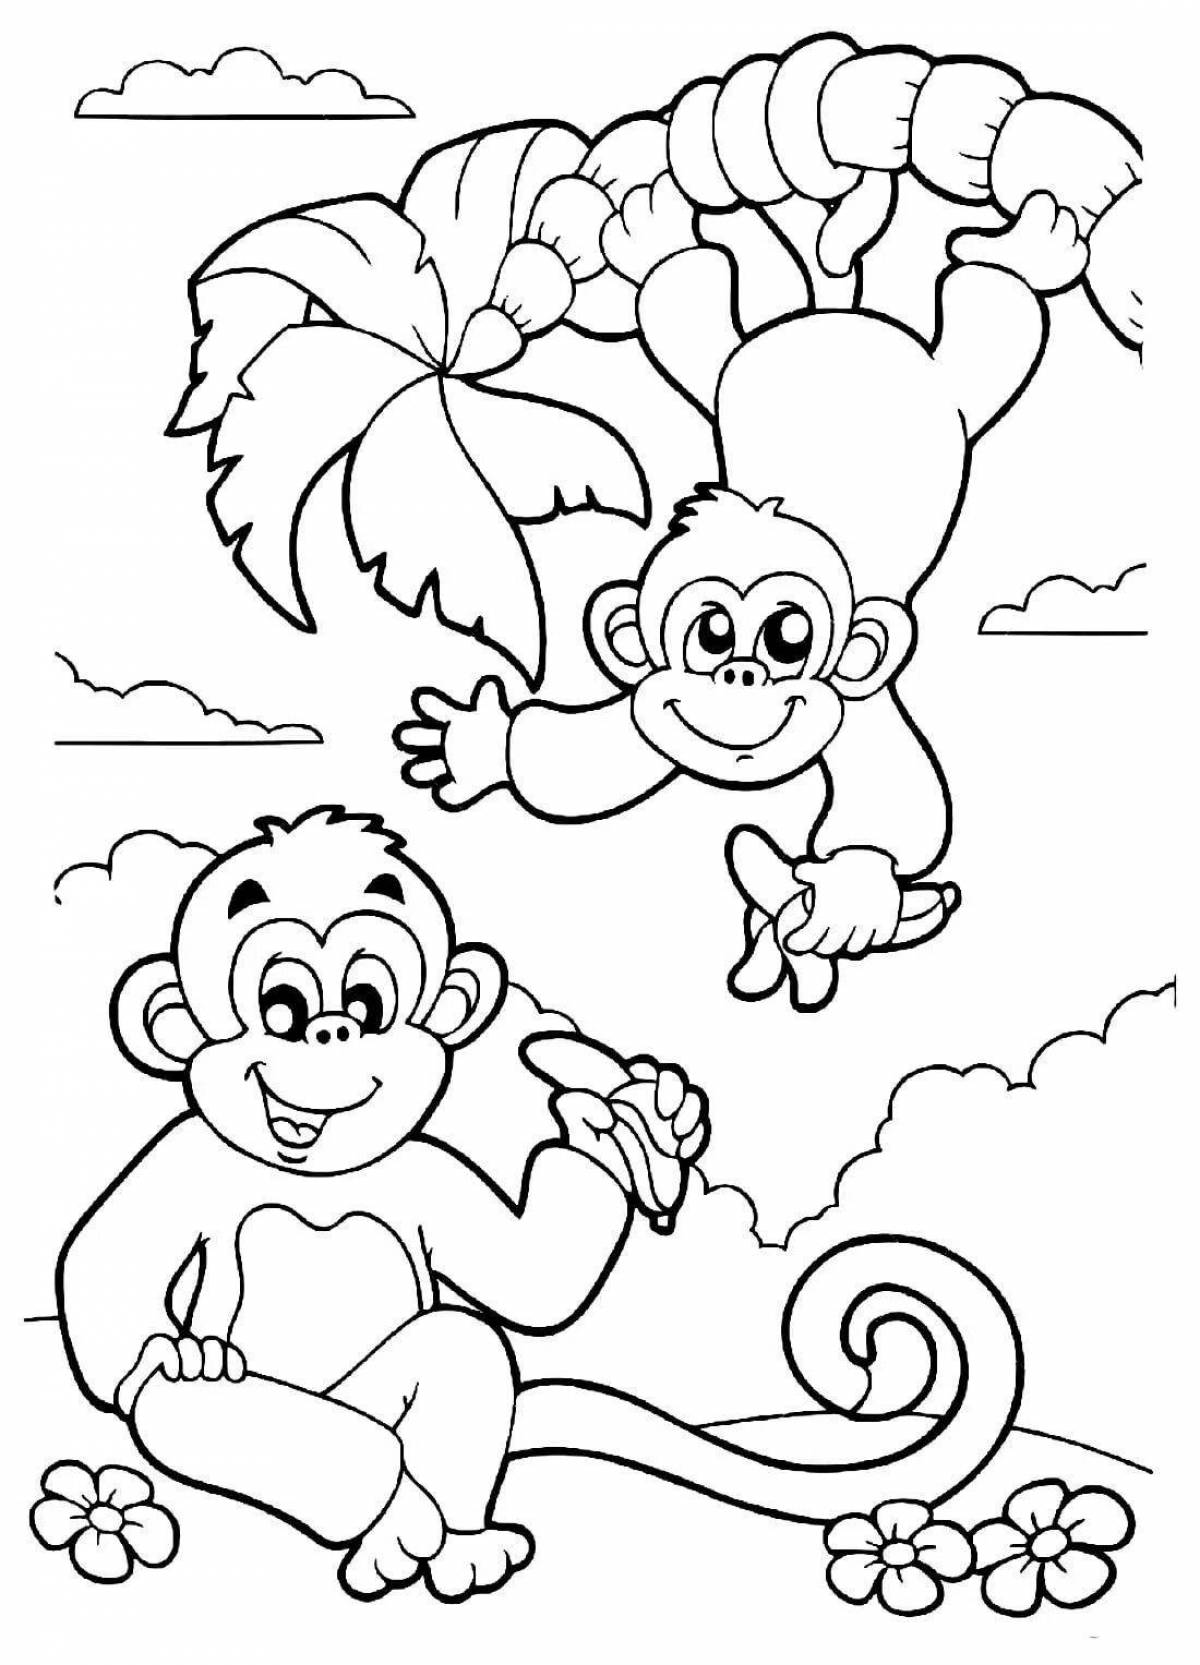 Animated monkey coloring page